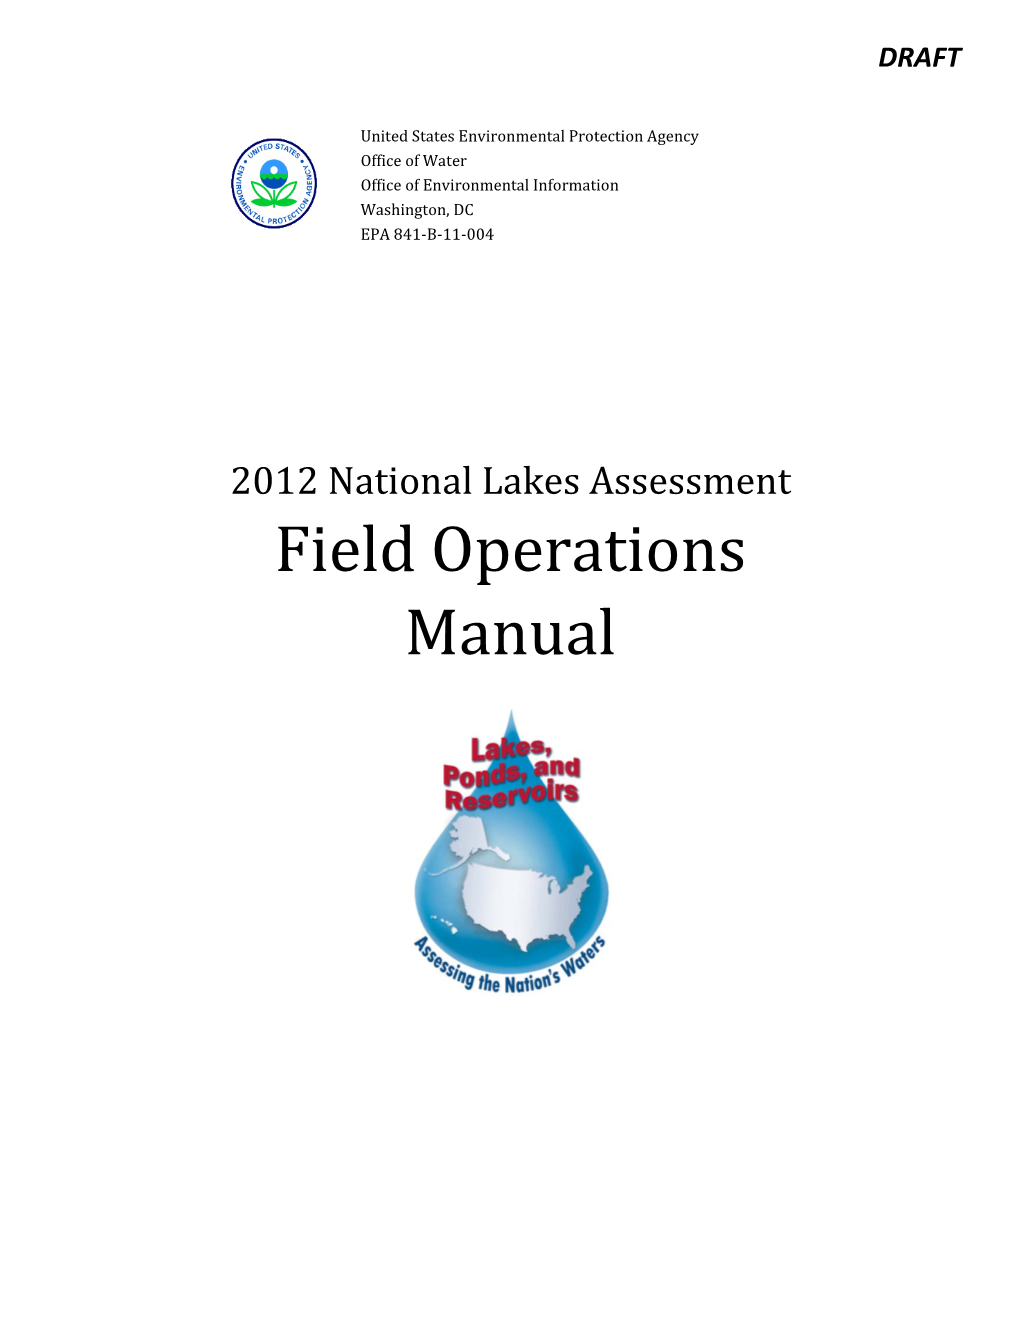 2012 National Lakes Assessment Field Operations Manual